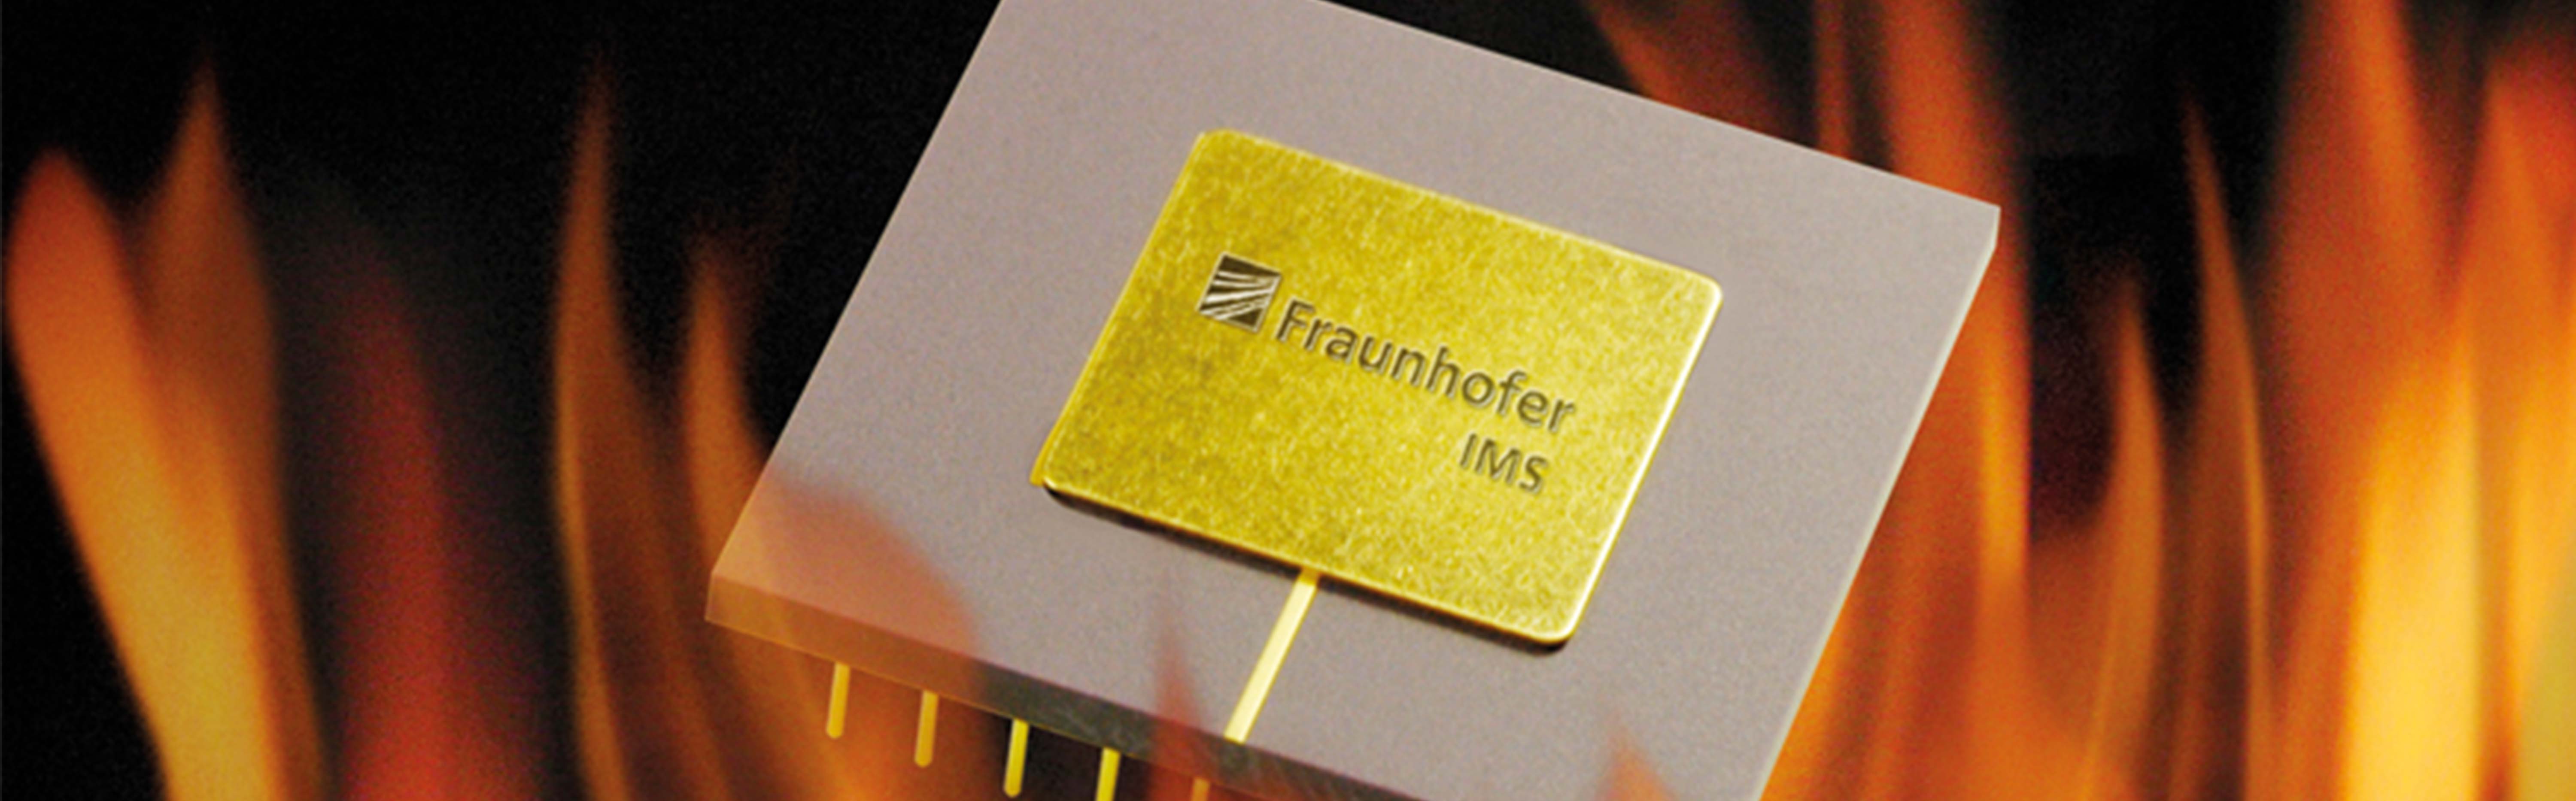 For the realization of integrated high-temperature systems, the Fraunhofer IMS offers circuit, sensor, as well as pilot manufacturing technologies.